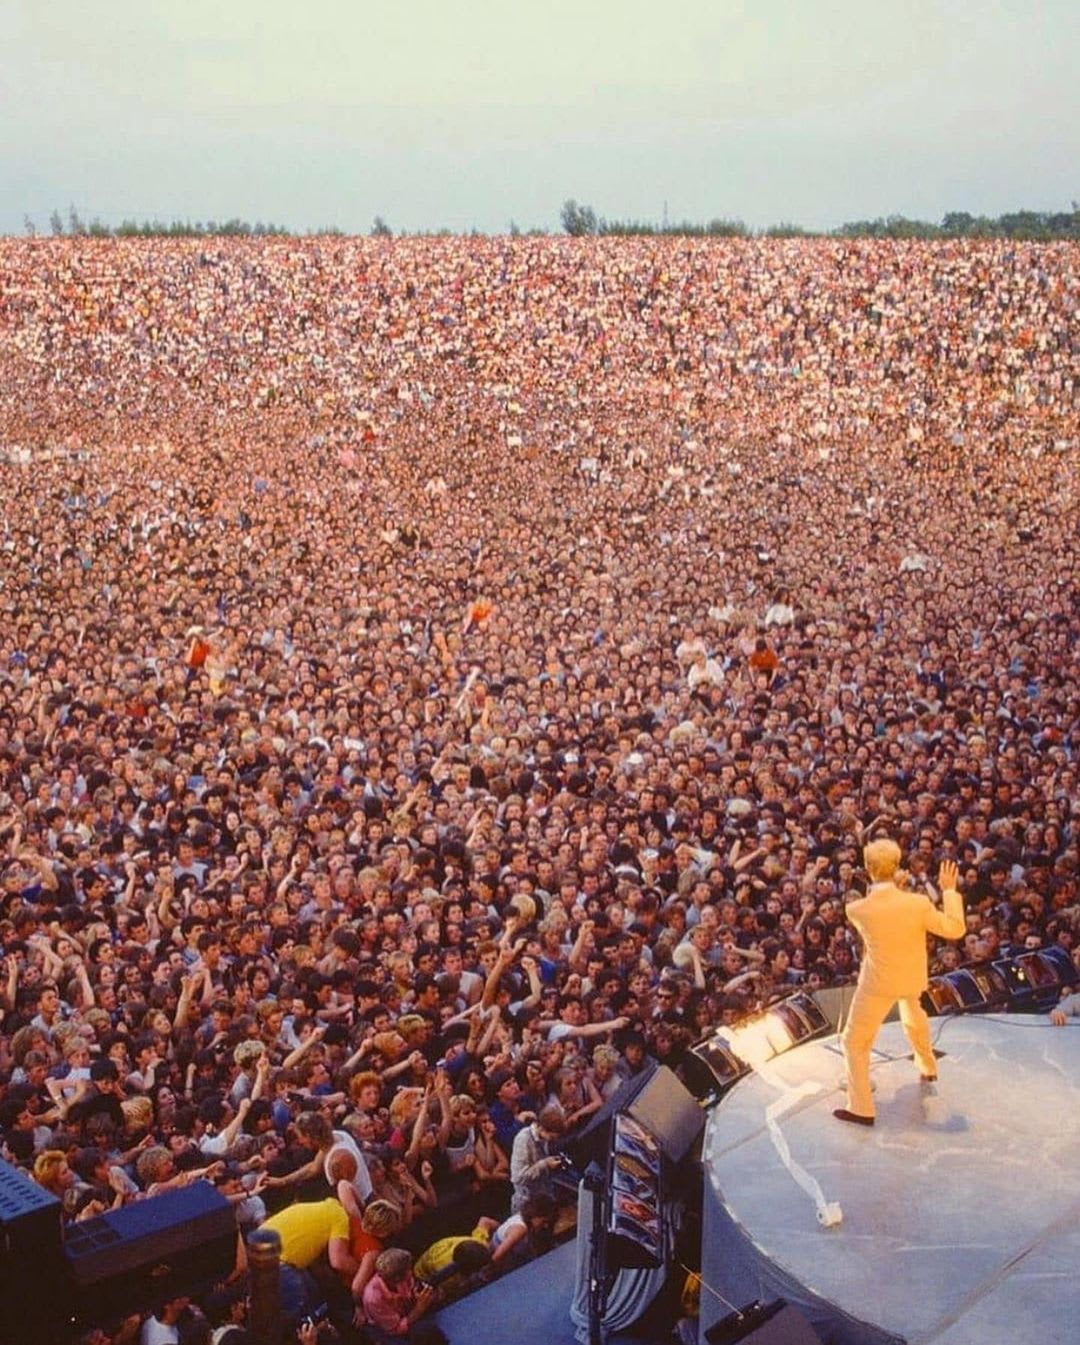 David Bowie performs to a huge crowd in 1983.